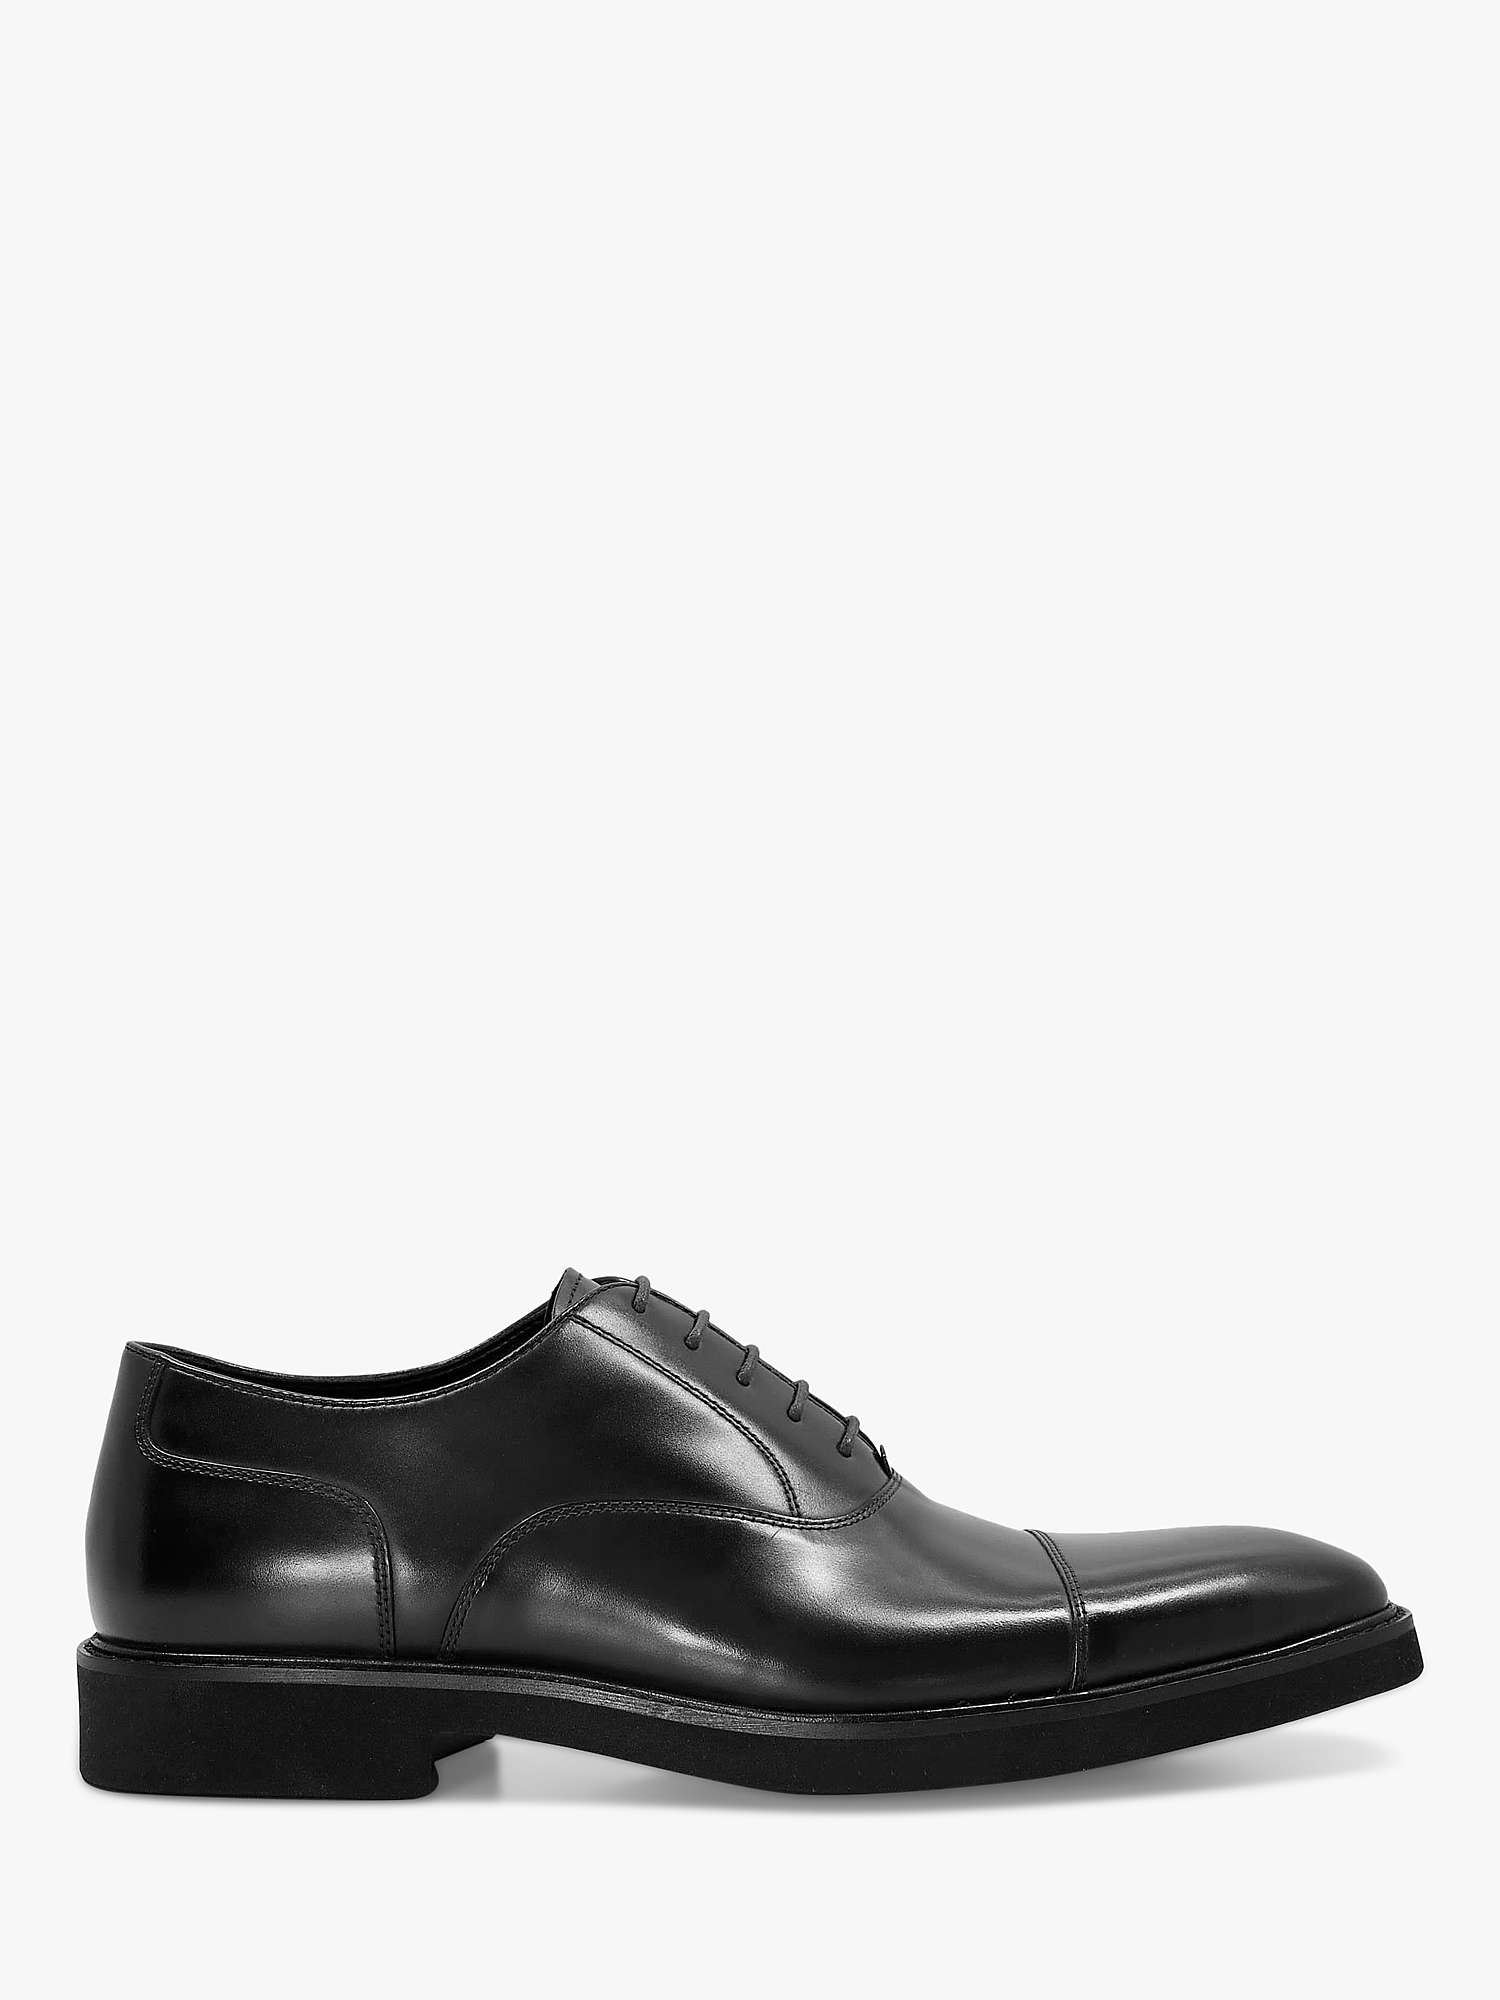 Buy Dune Shiloh Leather Chunky Sole Oxford Shoes Online at johnlewis.com